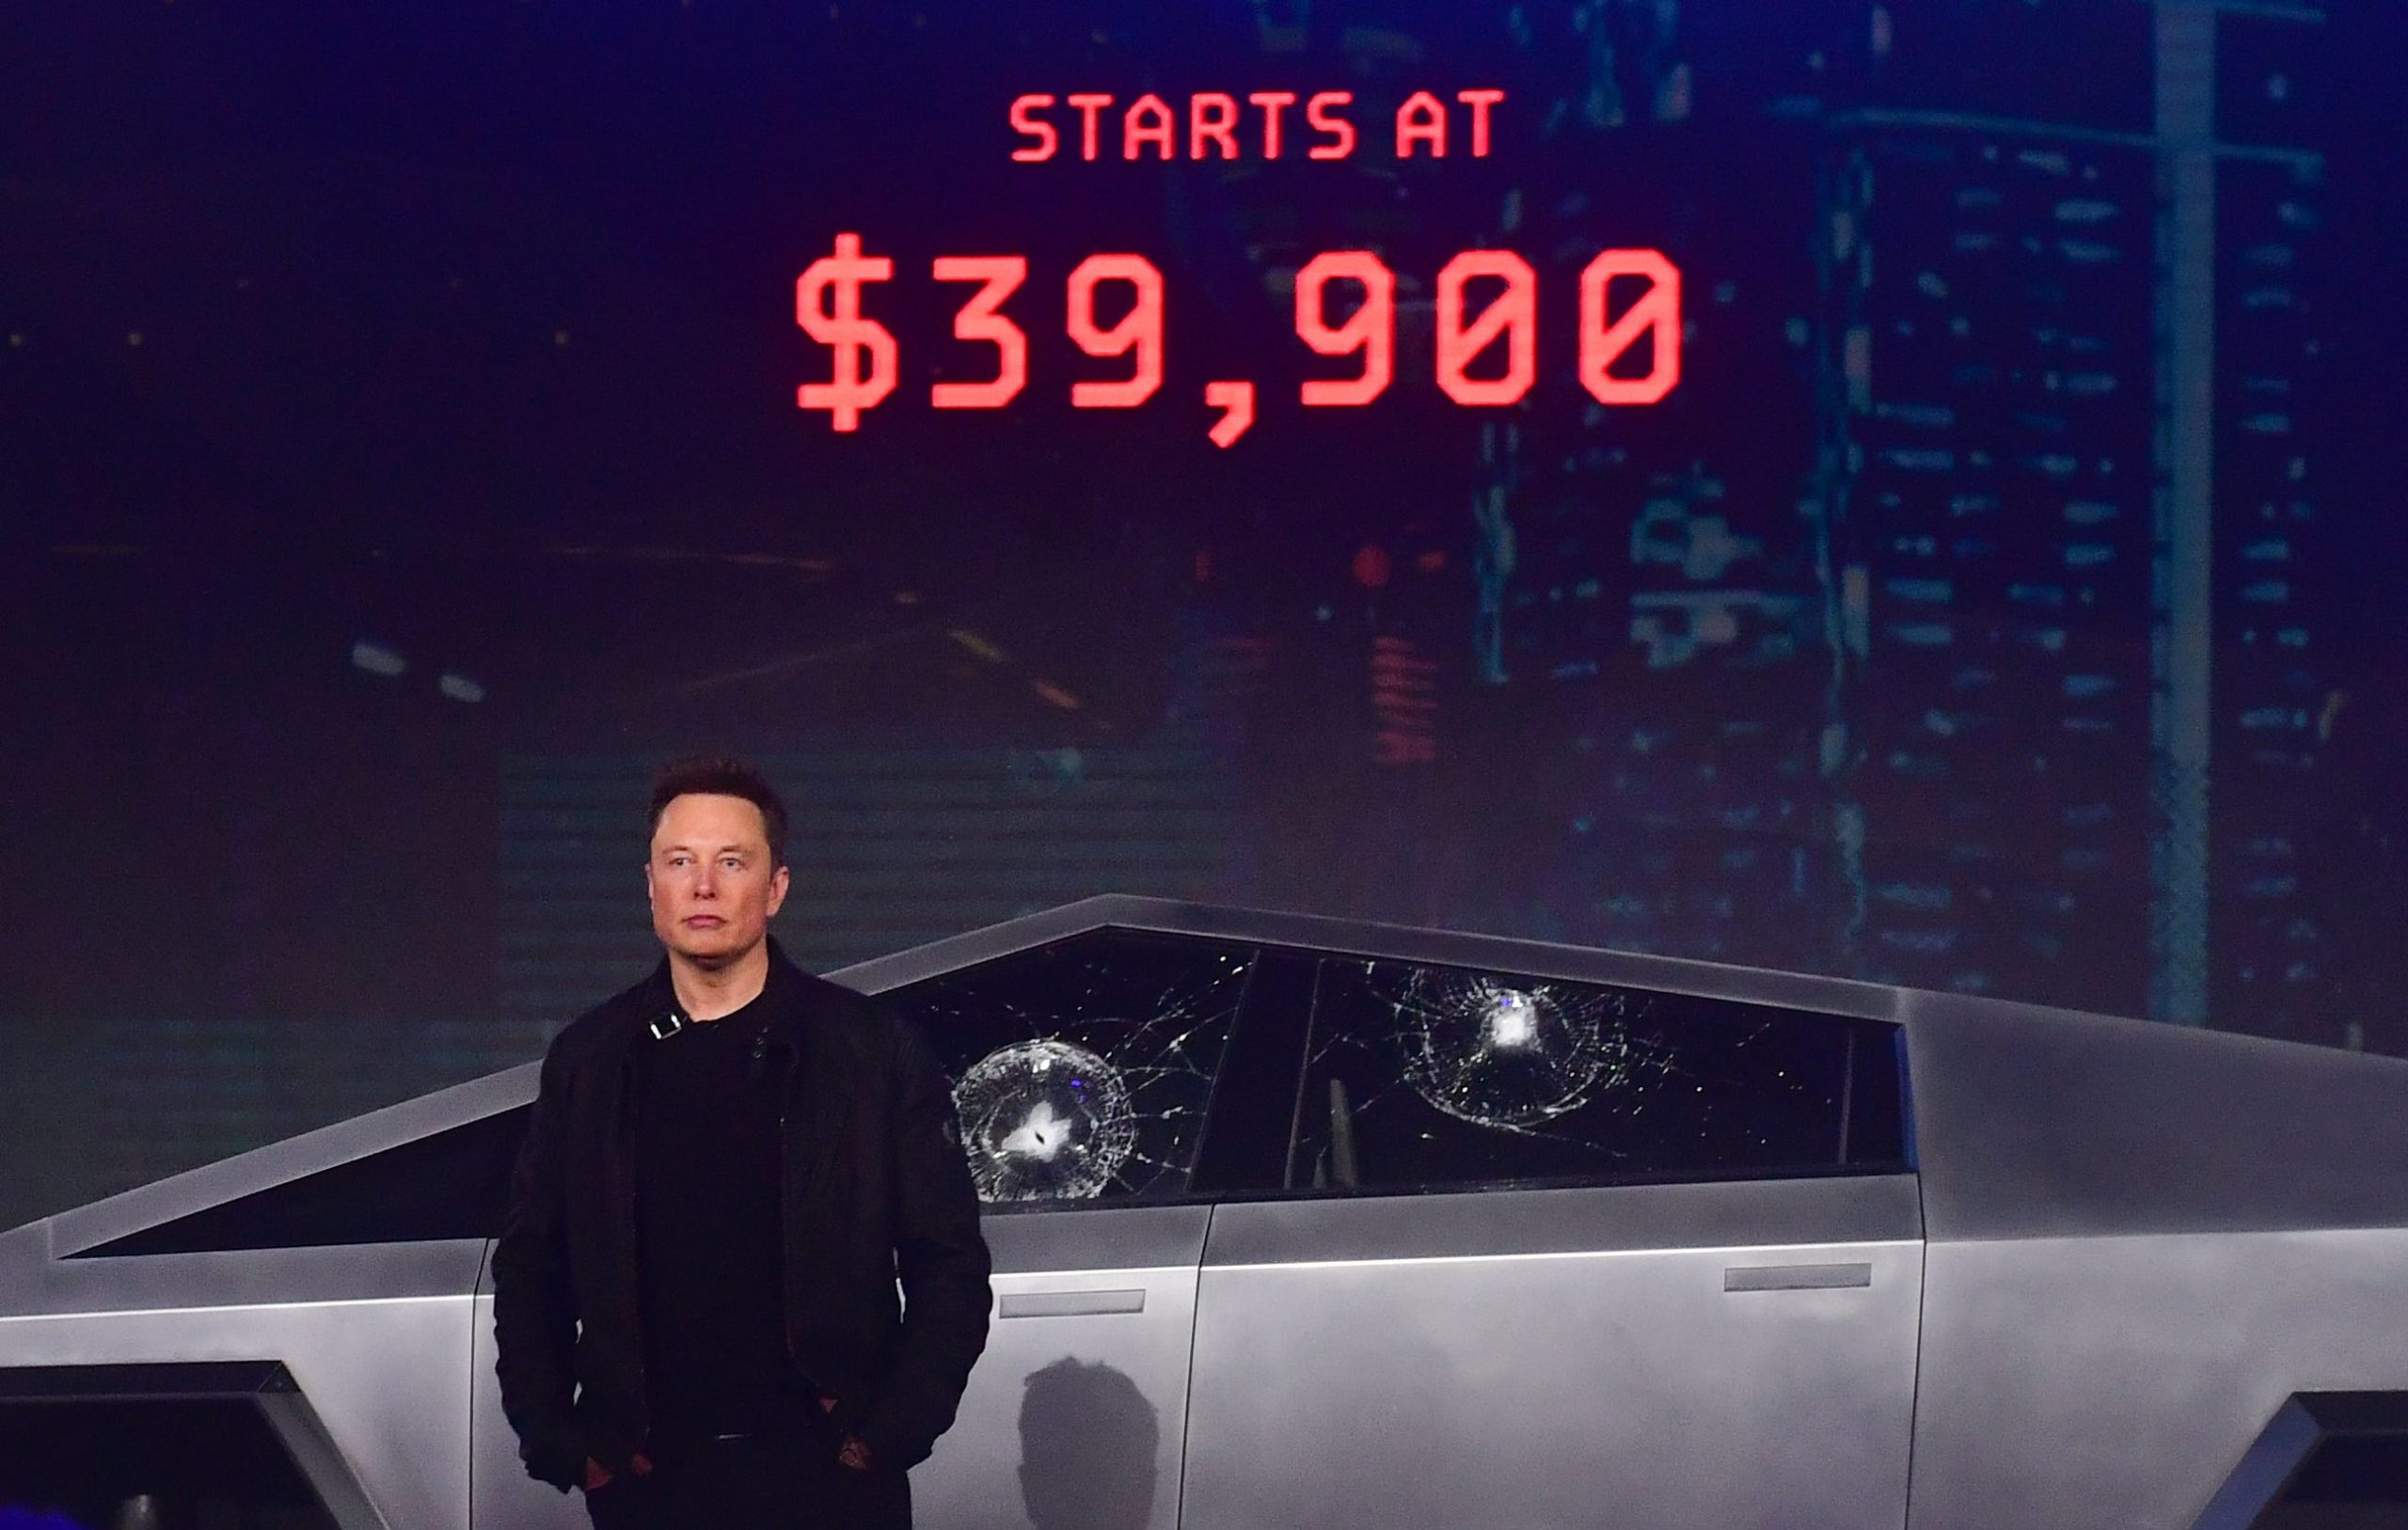 Tesla co-founder and CEO Elon Musk stands in front of the newly unveiled all-electric battery-powered Tesla's Cybertruck